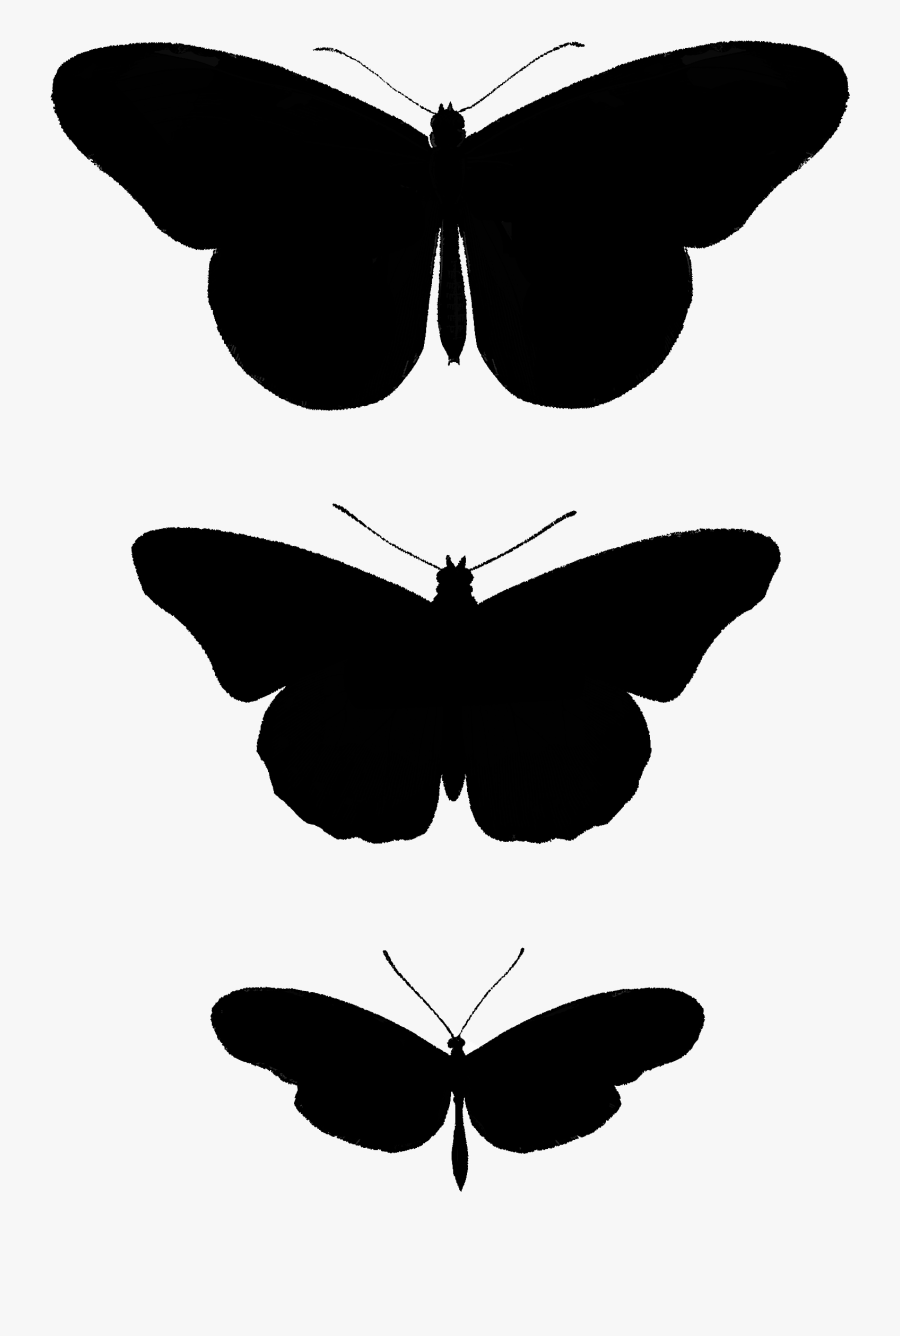 2267 Butterfly Silhouettes Free Vintage Clip Art➢ Download - Brush-footed Butterfly, Transparent Clipart